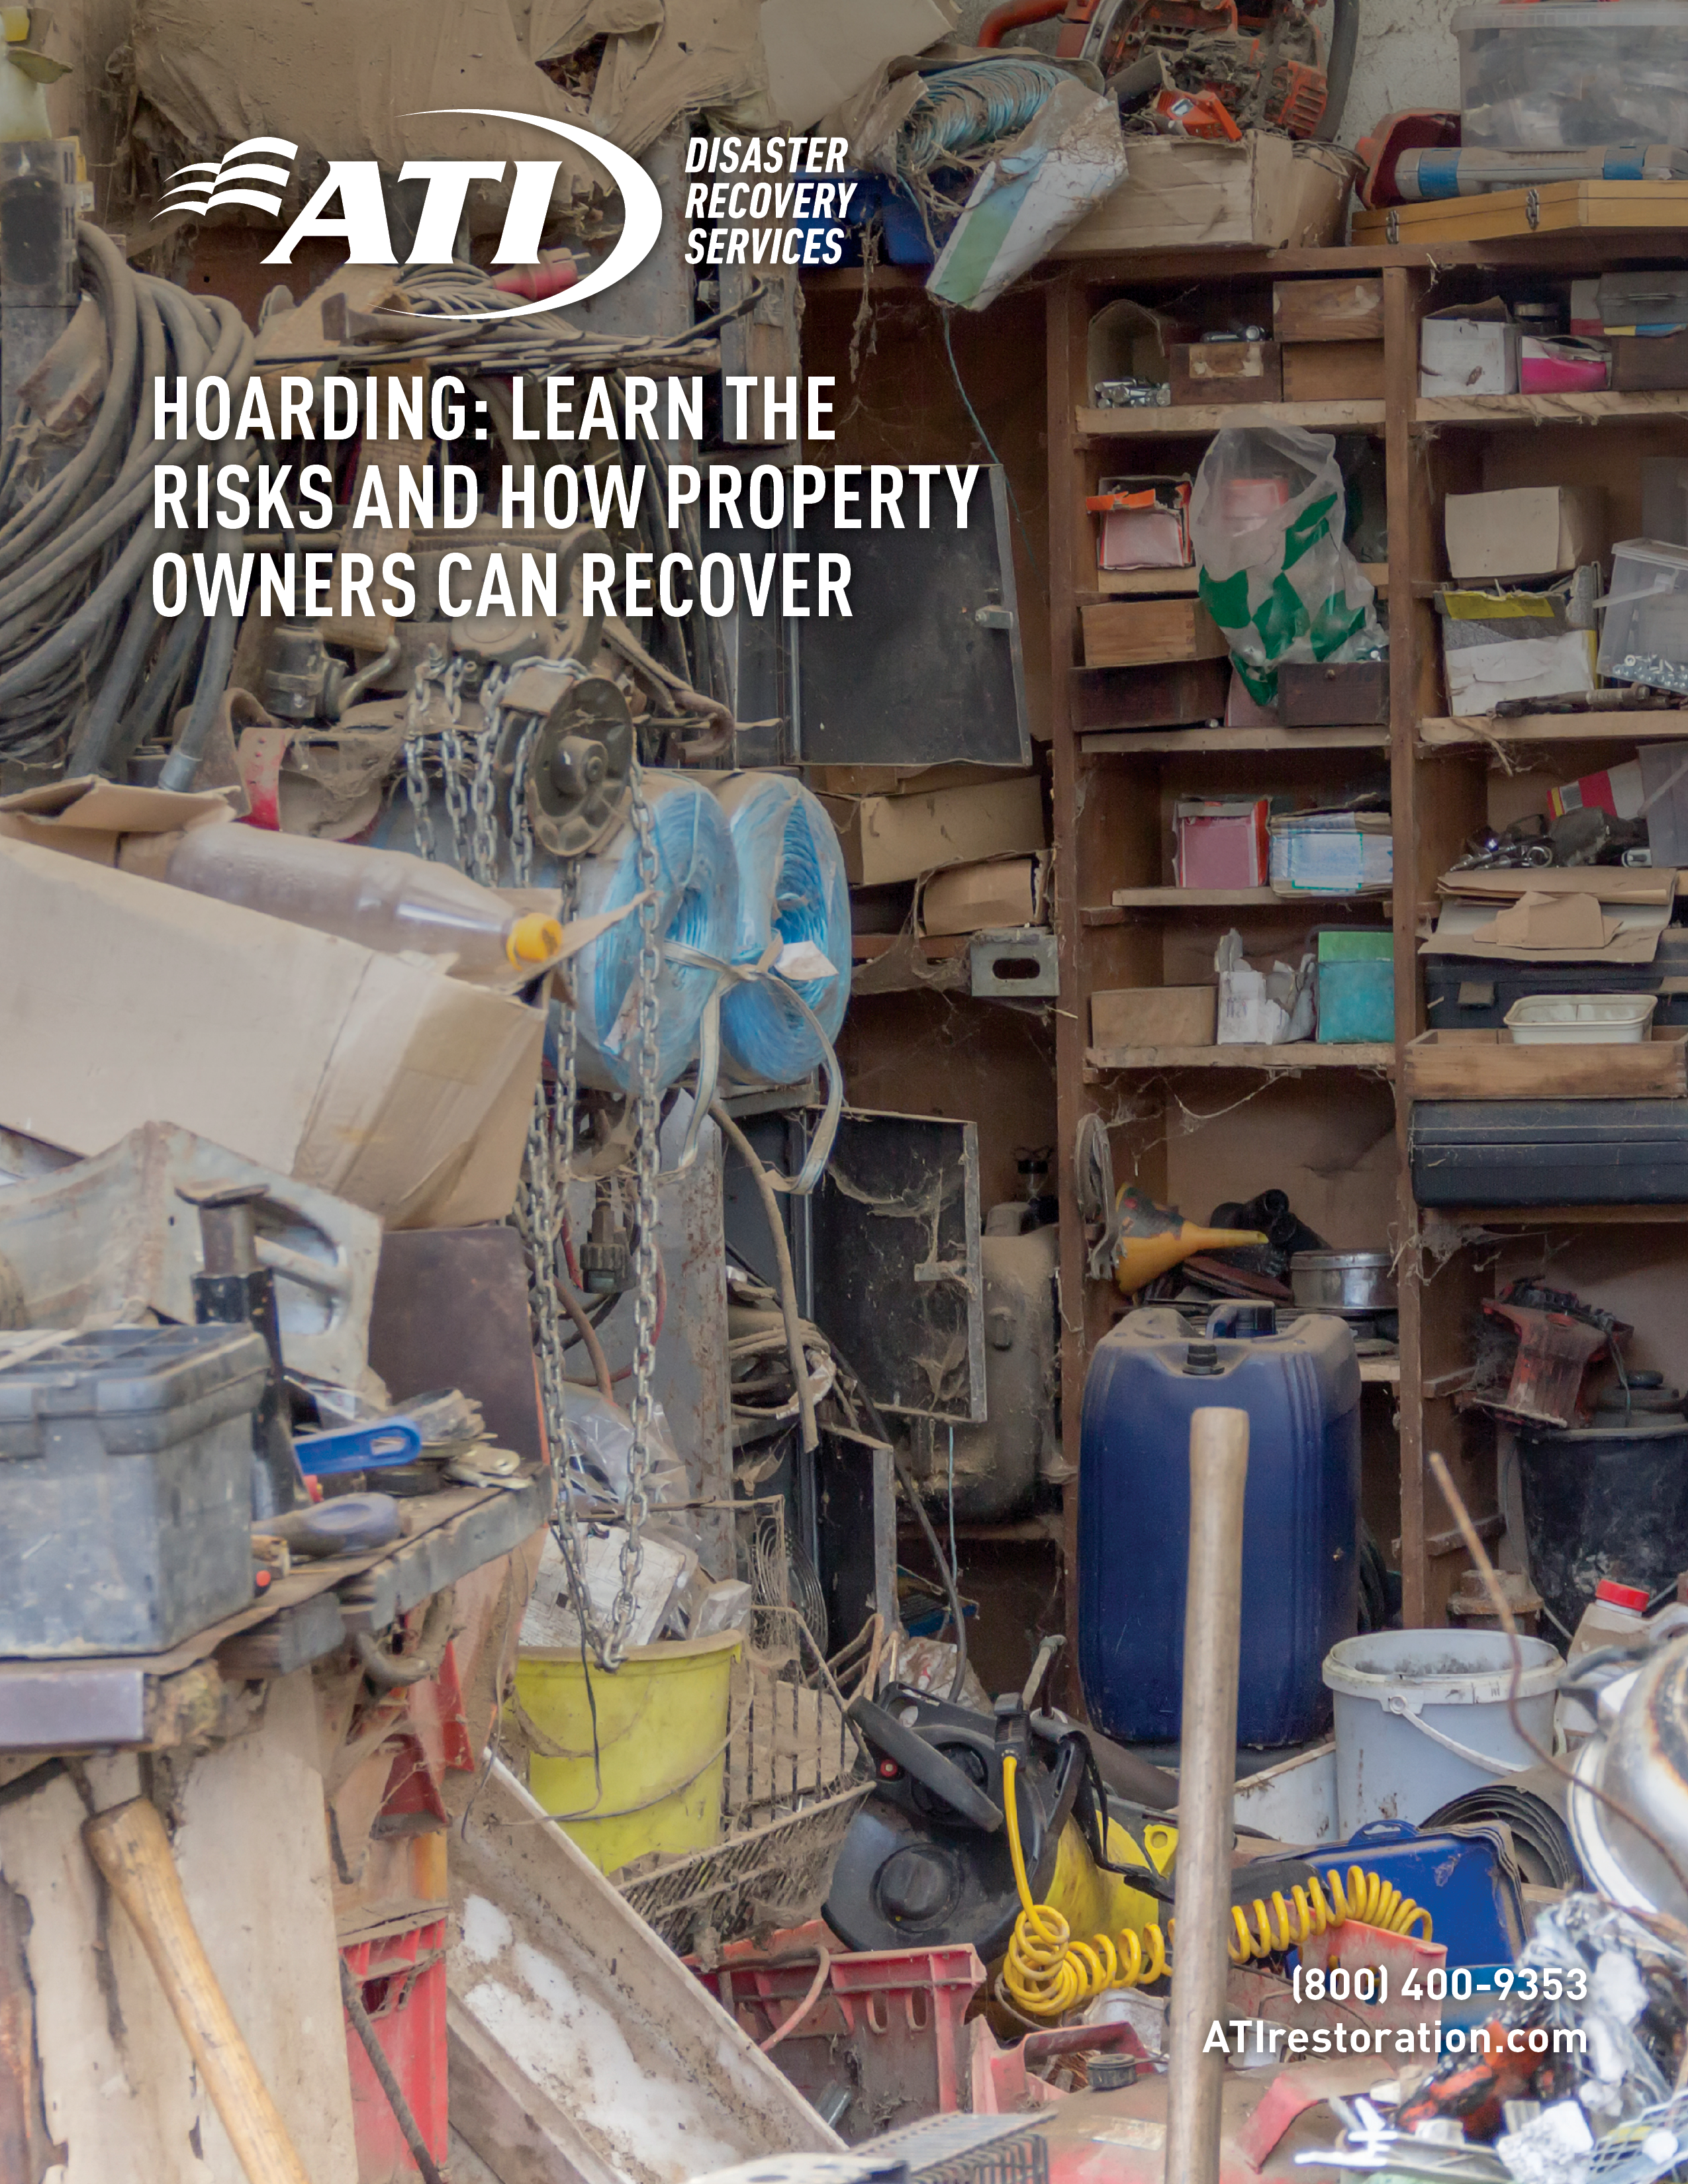 Hoarding: Learn the Risks and How Property Owners Can Recover